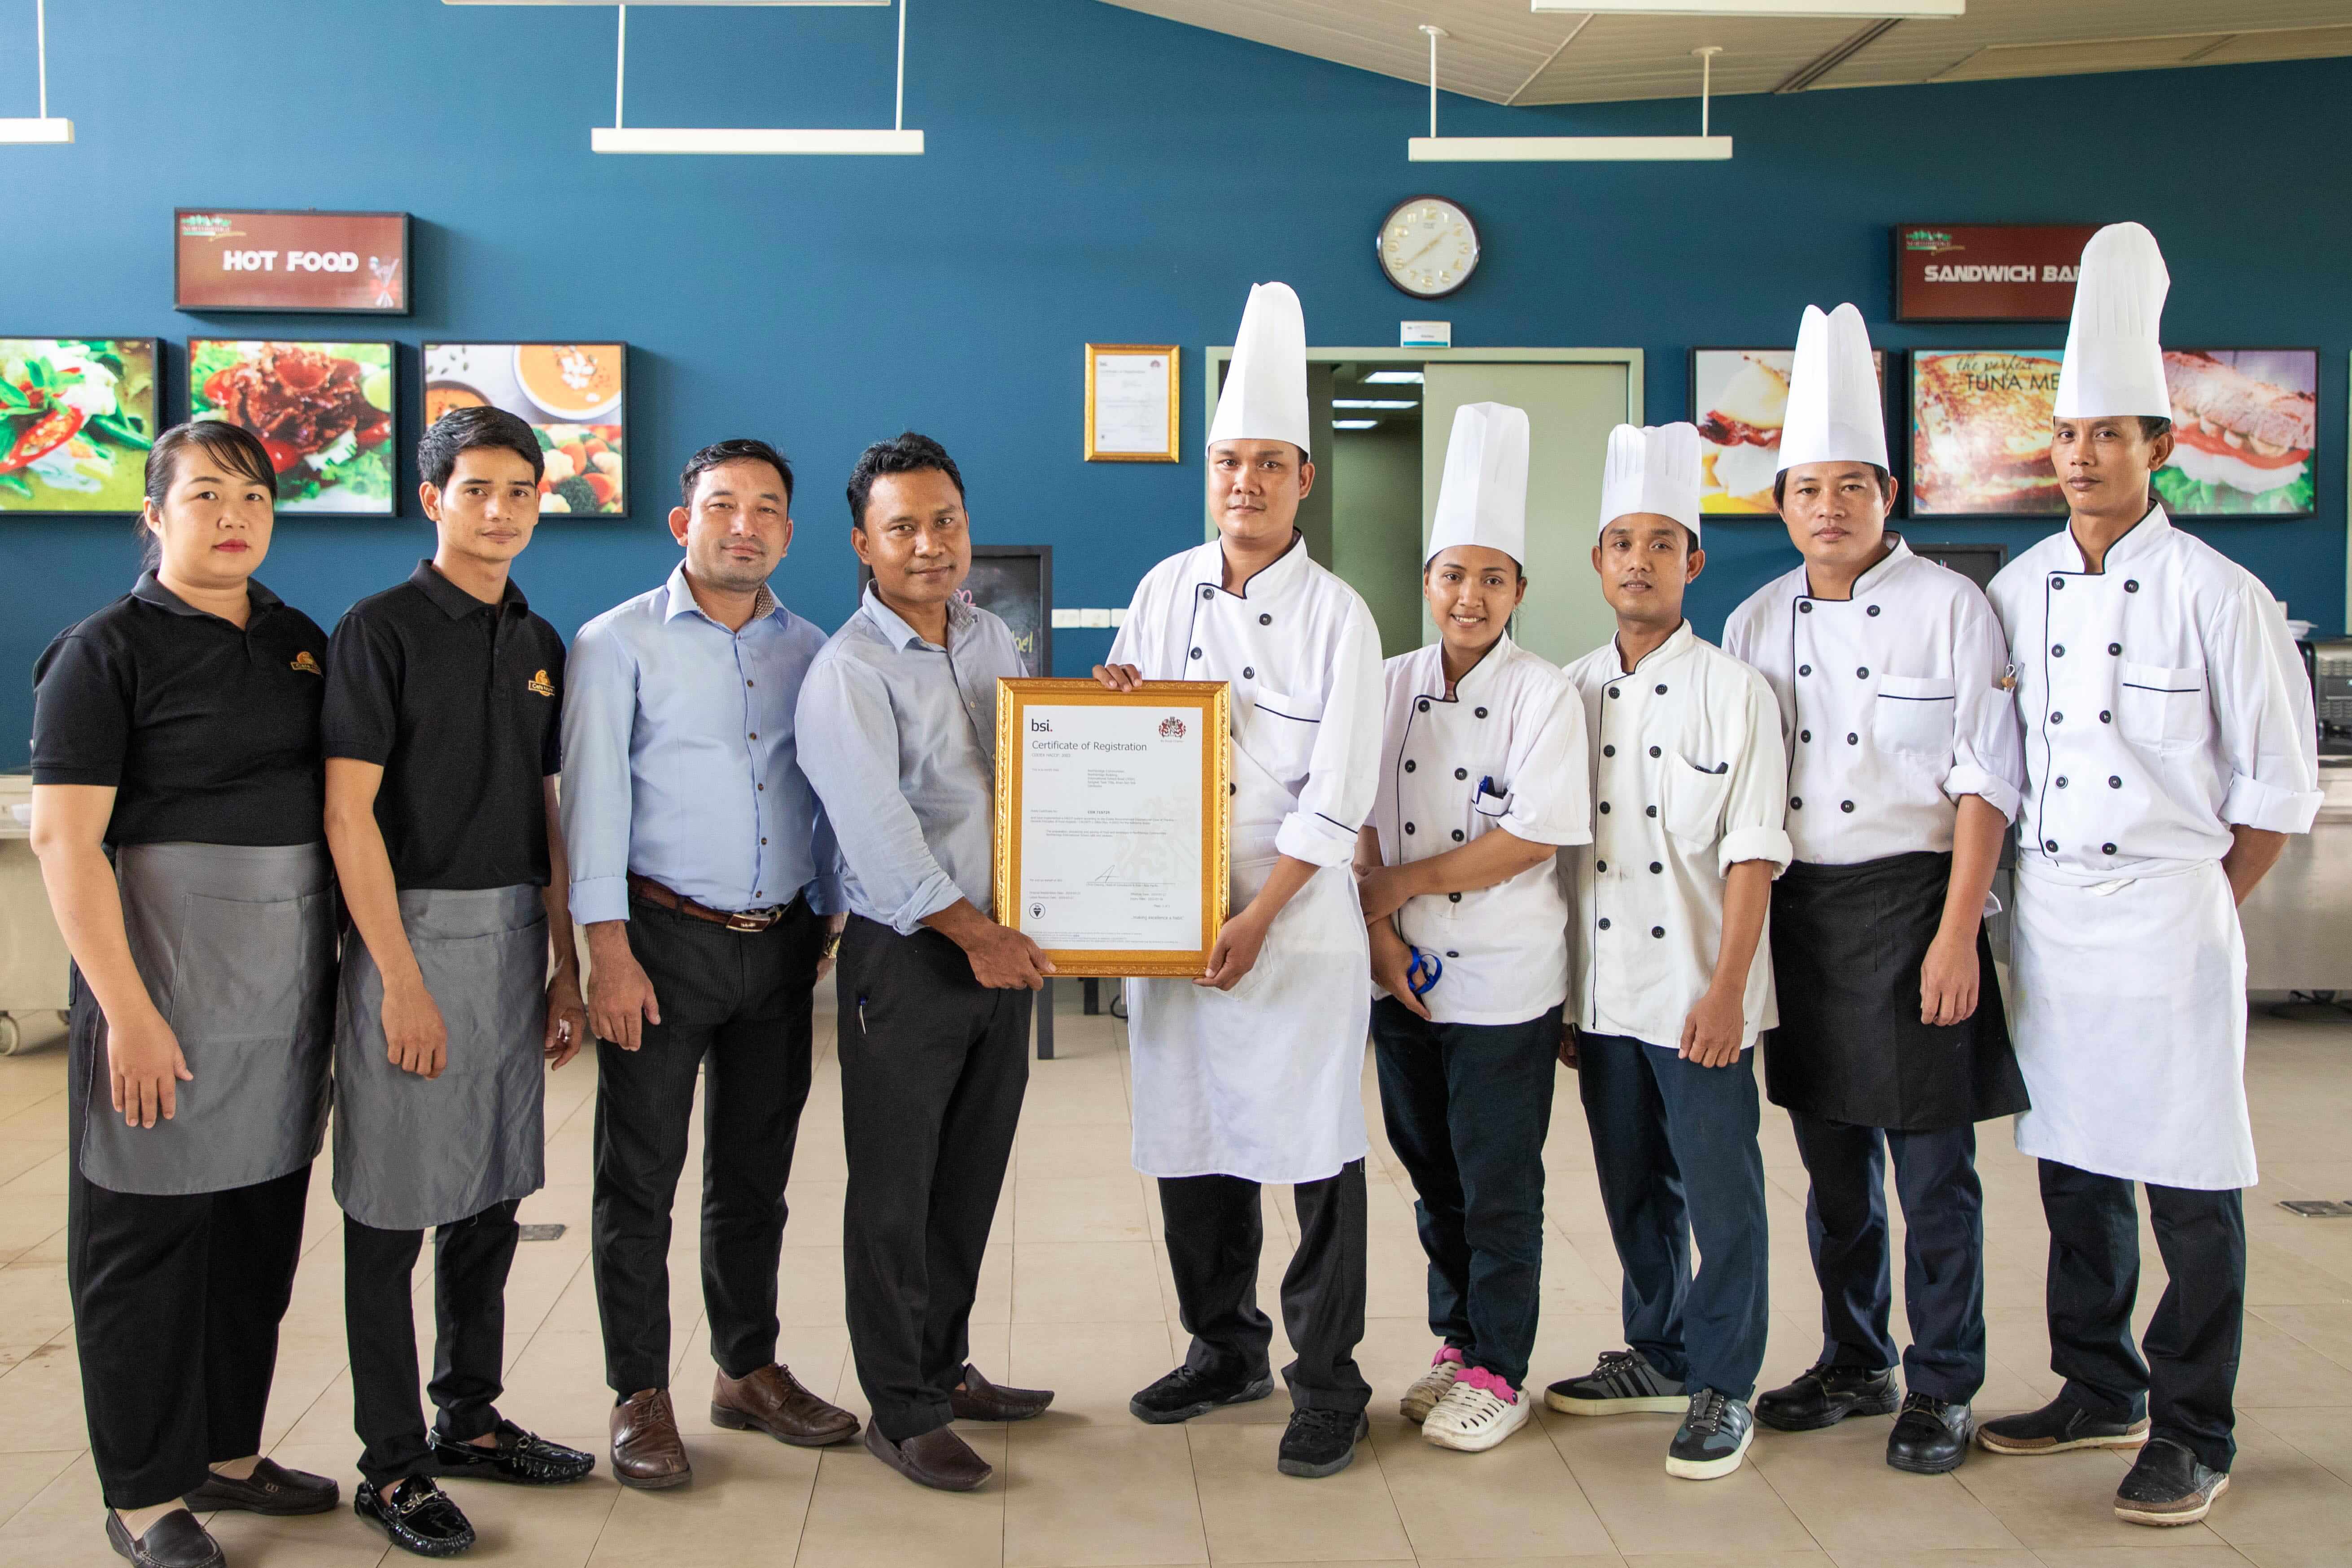 Northbridge catering receives Certificate of Registration from British Standards Institution - northbridge-catering-receives-certificate-of-registration-from-british-standards-institution